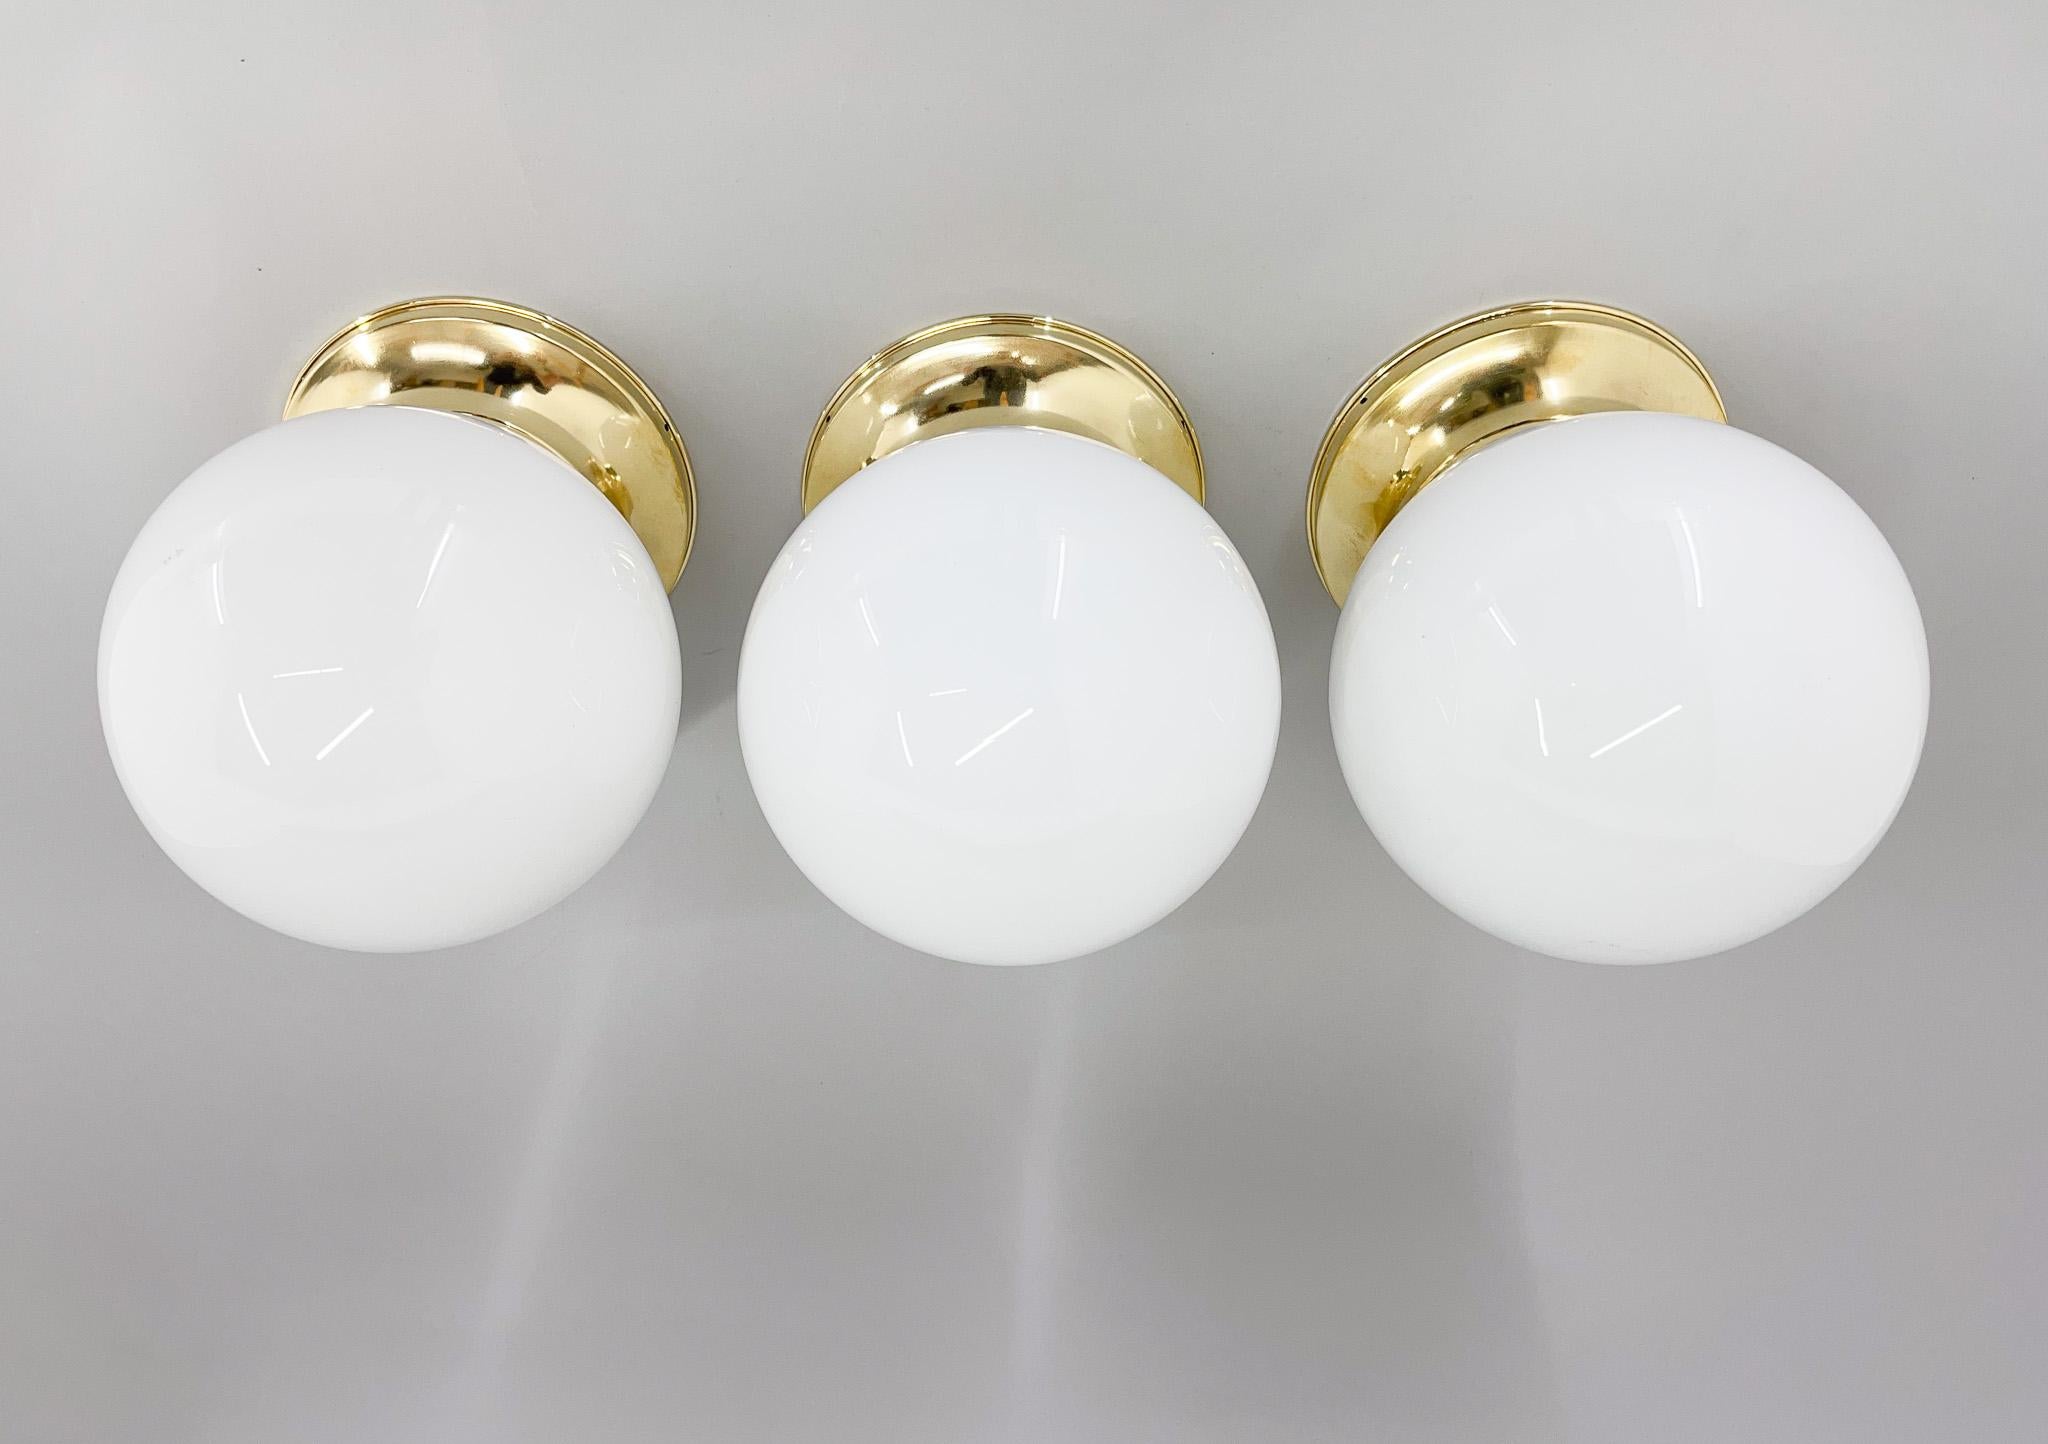 Set of three beautiful restrored brass and milk glass vintage ceiling lights. The light have been restored. The diameter of the brass base is 18 cm. Bulbs: 3x 1 E26-E27. US wiring compatible.